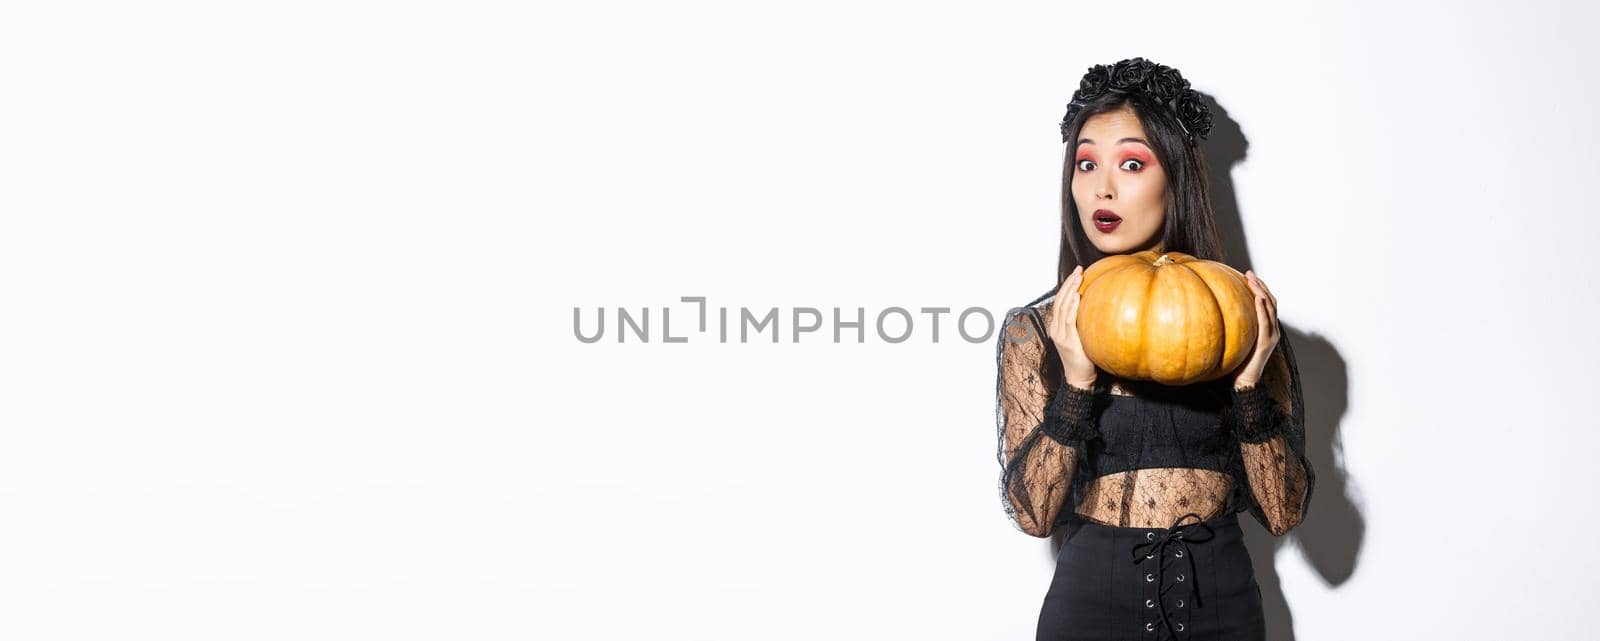 Portrait of woman lifting heavy pumpkin, getting ready for halloween, wearing witch costume, standing over white background.